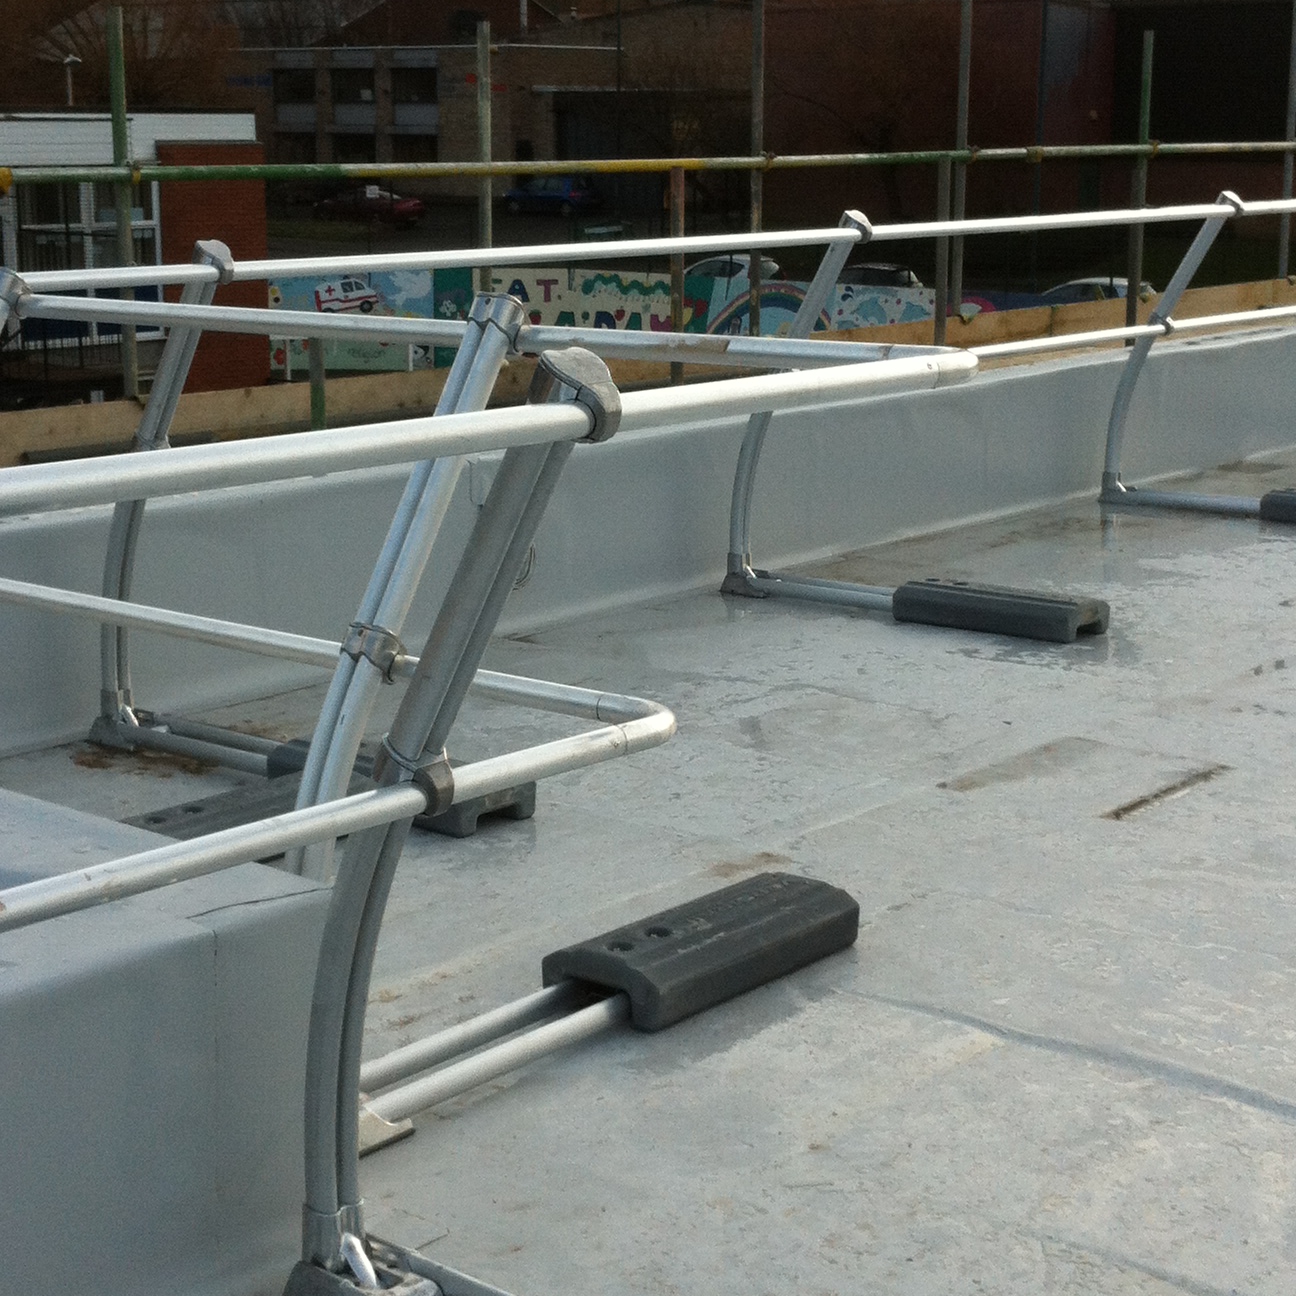 Railings & Barrier Systems Mantech (Safety Systems) Ltd